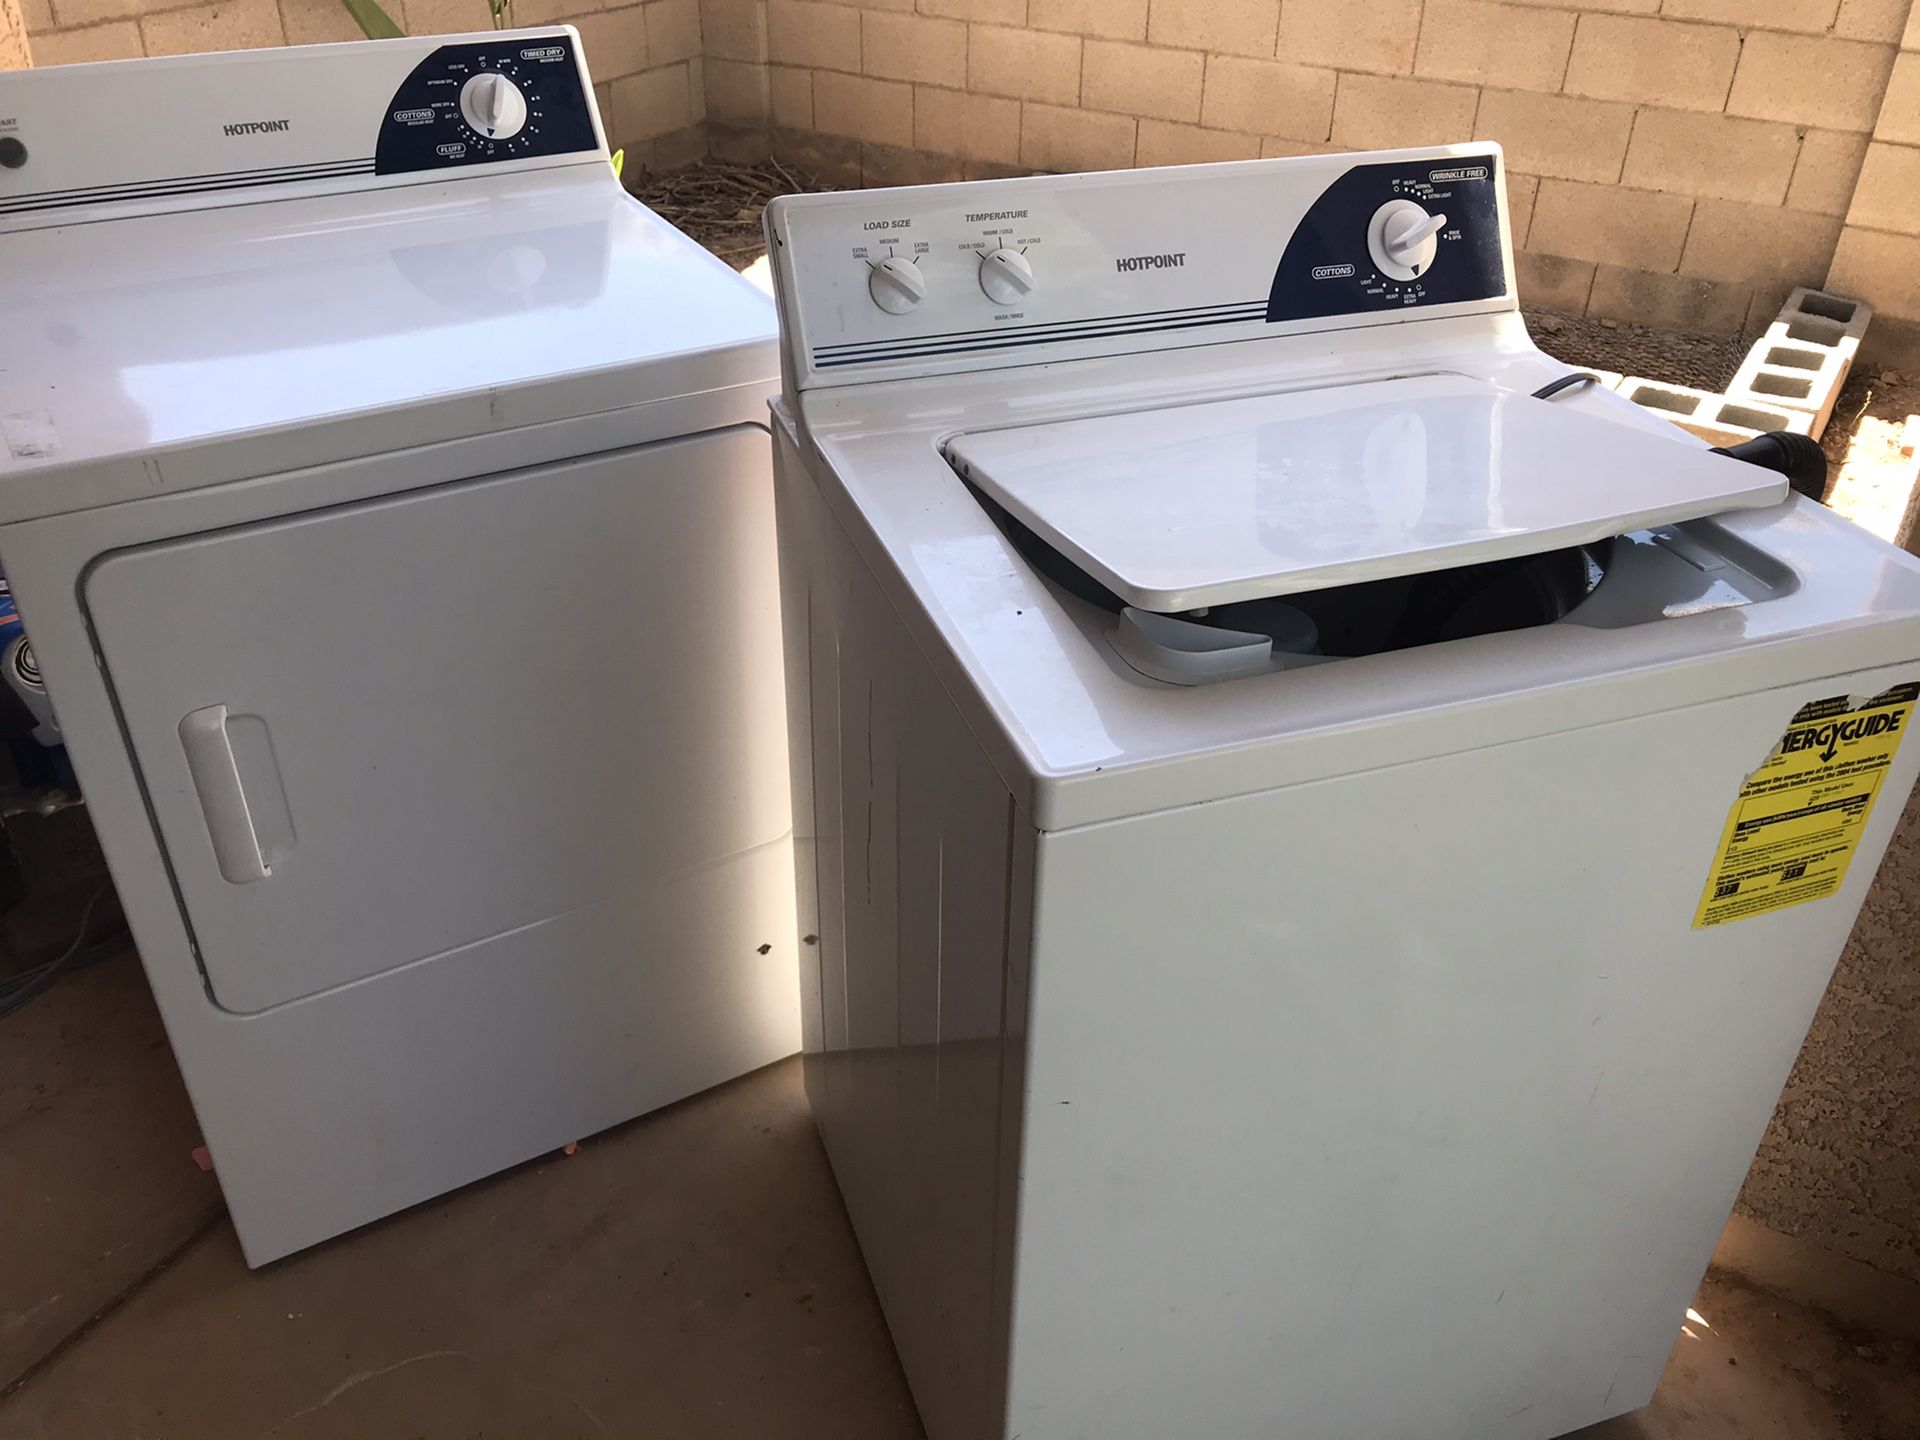 GE Hotpoint Washer and dryer